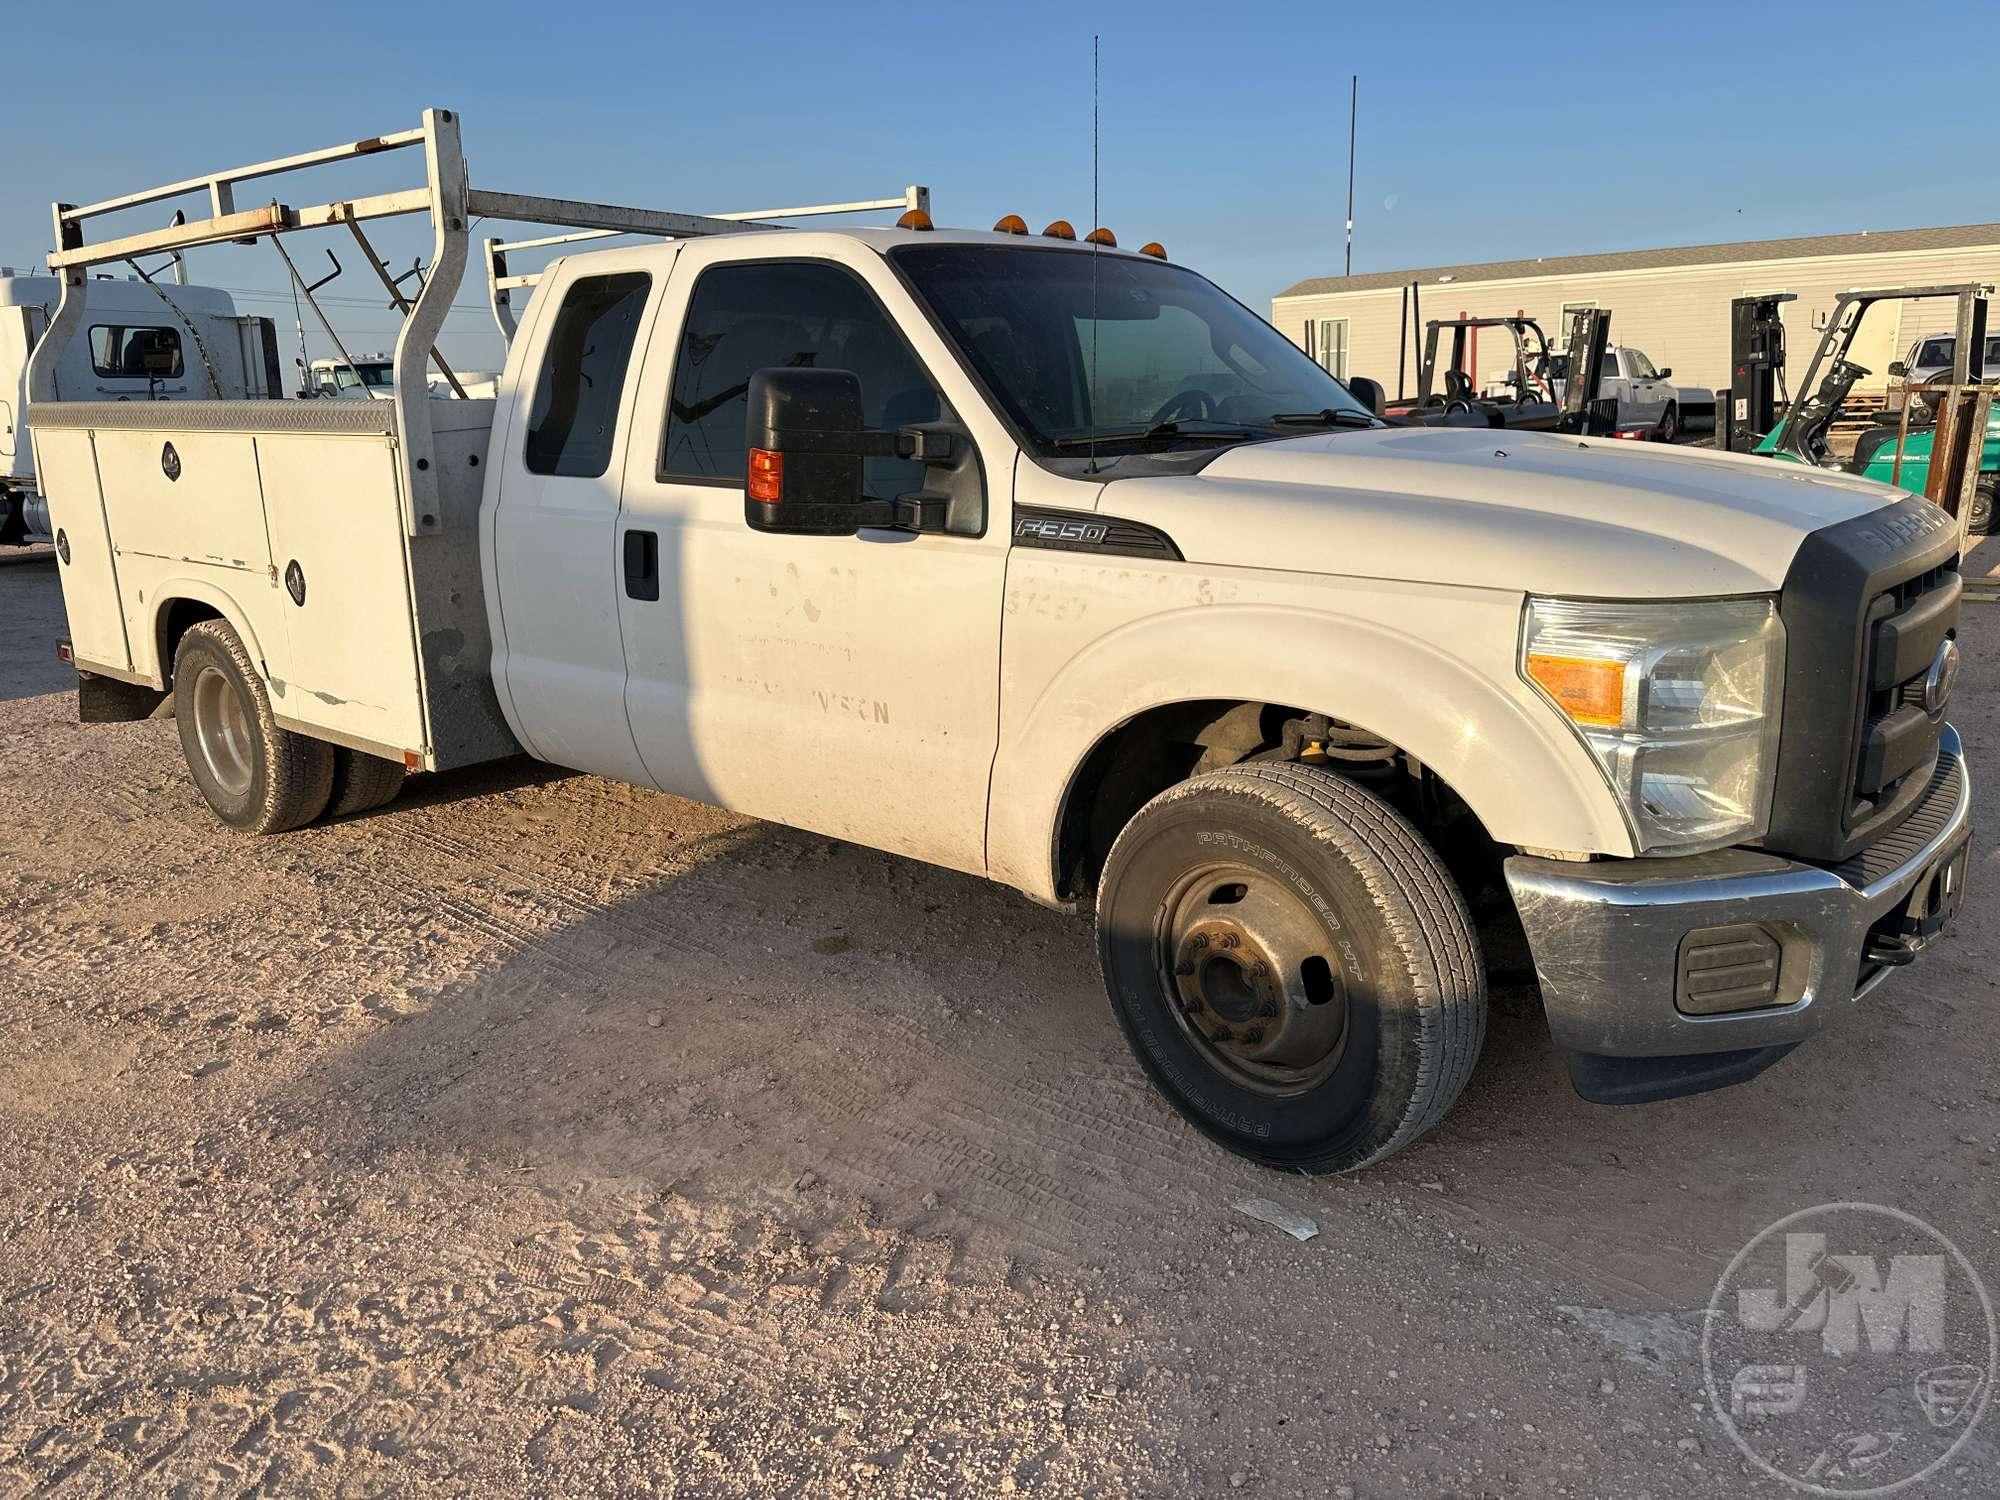 2012 FORD F-350 SUPER DUTY EXTENDED CAB DUALLY UTILITY TRUCK VIN: 1FD8X3G68CEB86240